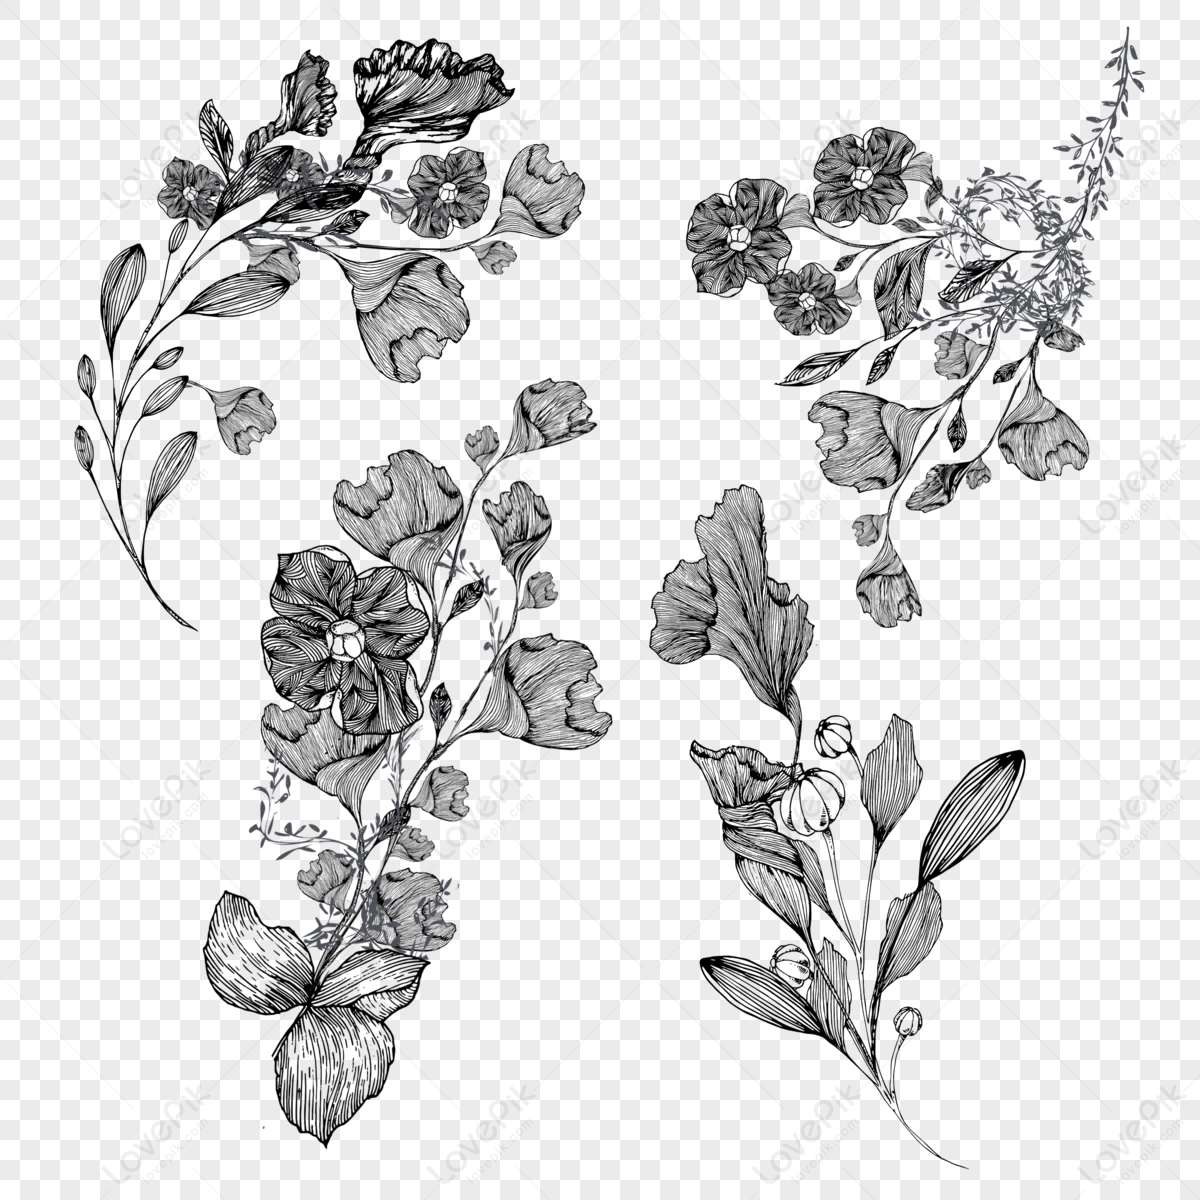 Pansy flower sketch art, vintage style printed for cute flower coloring  pages. Vector illustration of a Beautiful pansy flower, and leaves,  realistic Neon Violet drawing, isolated on white background, 21192897  Vector Art